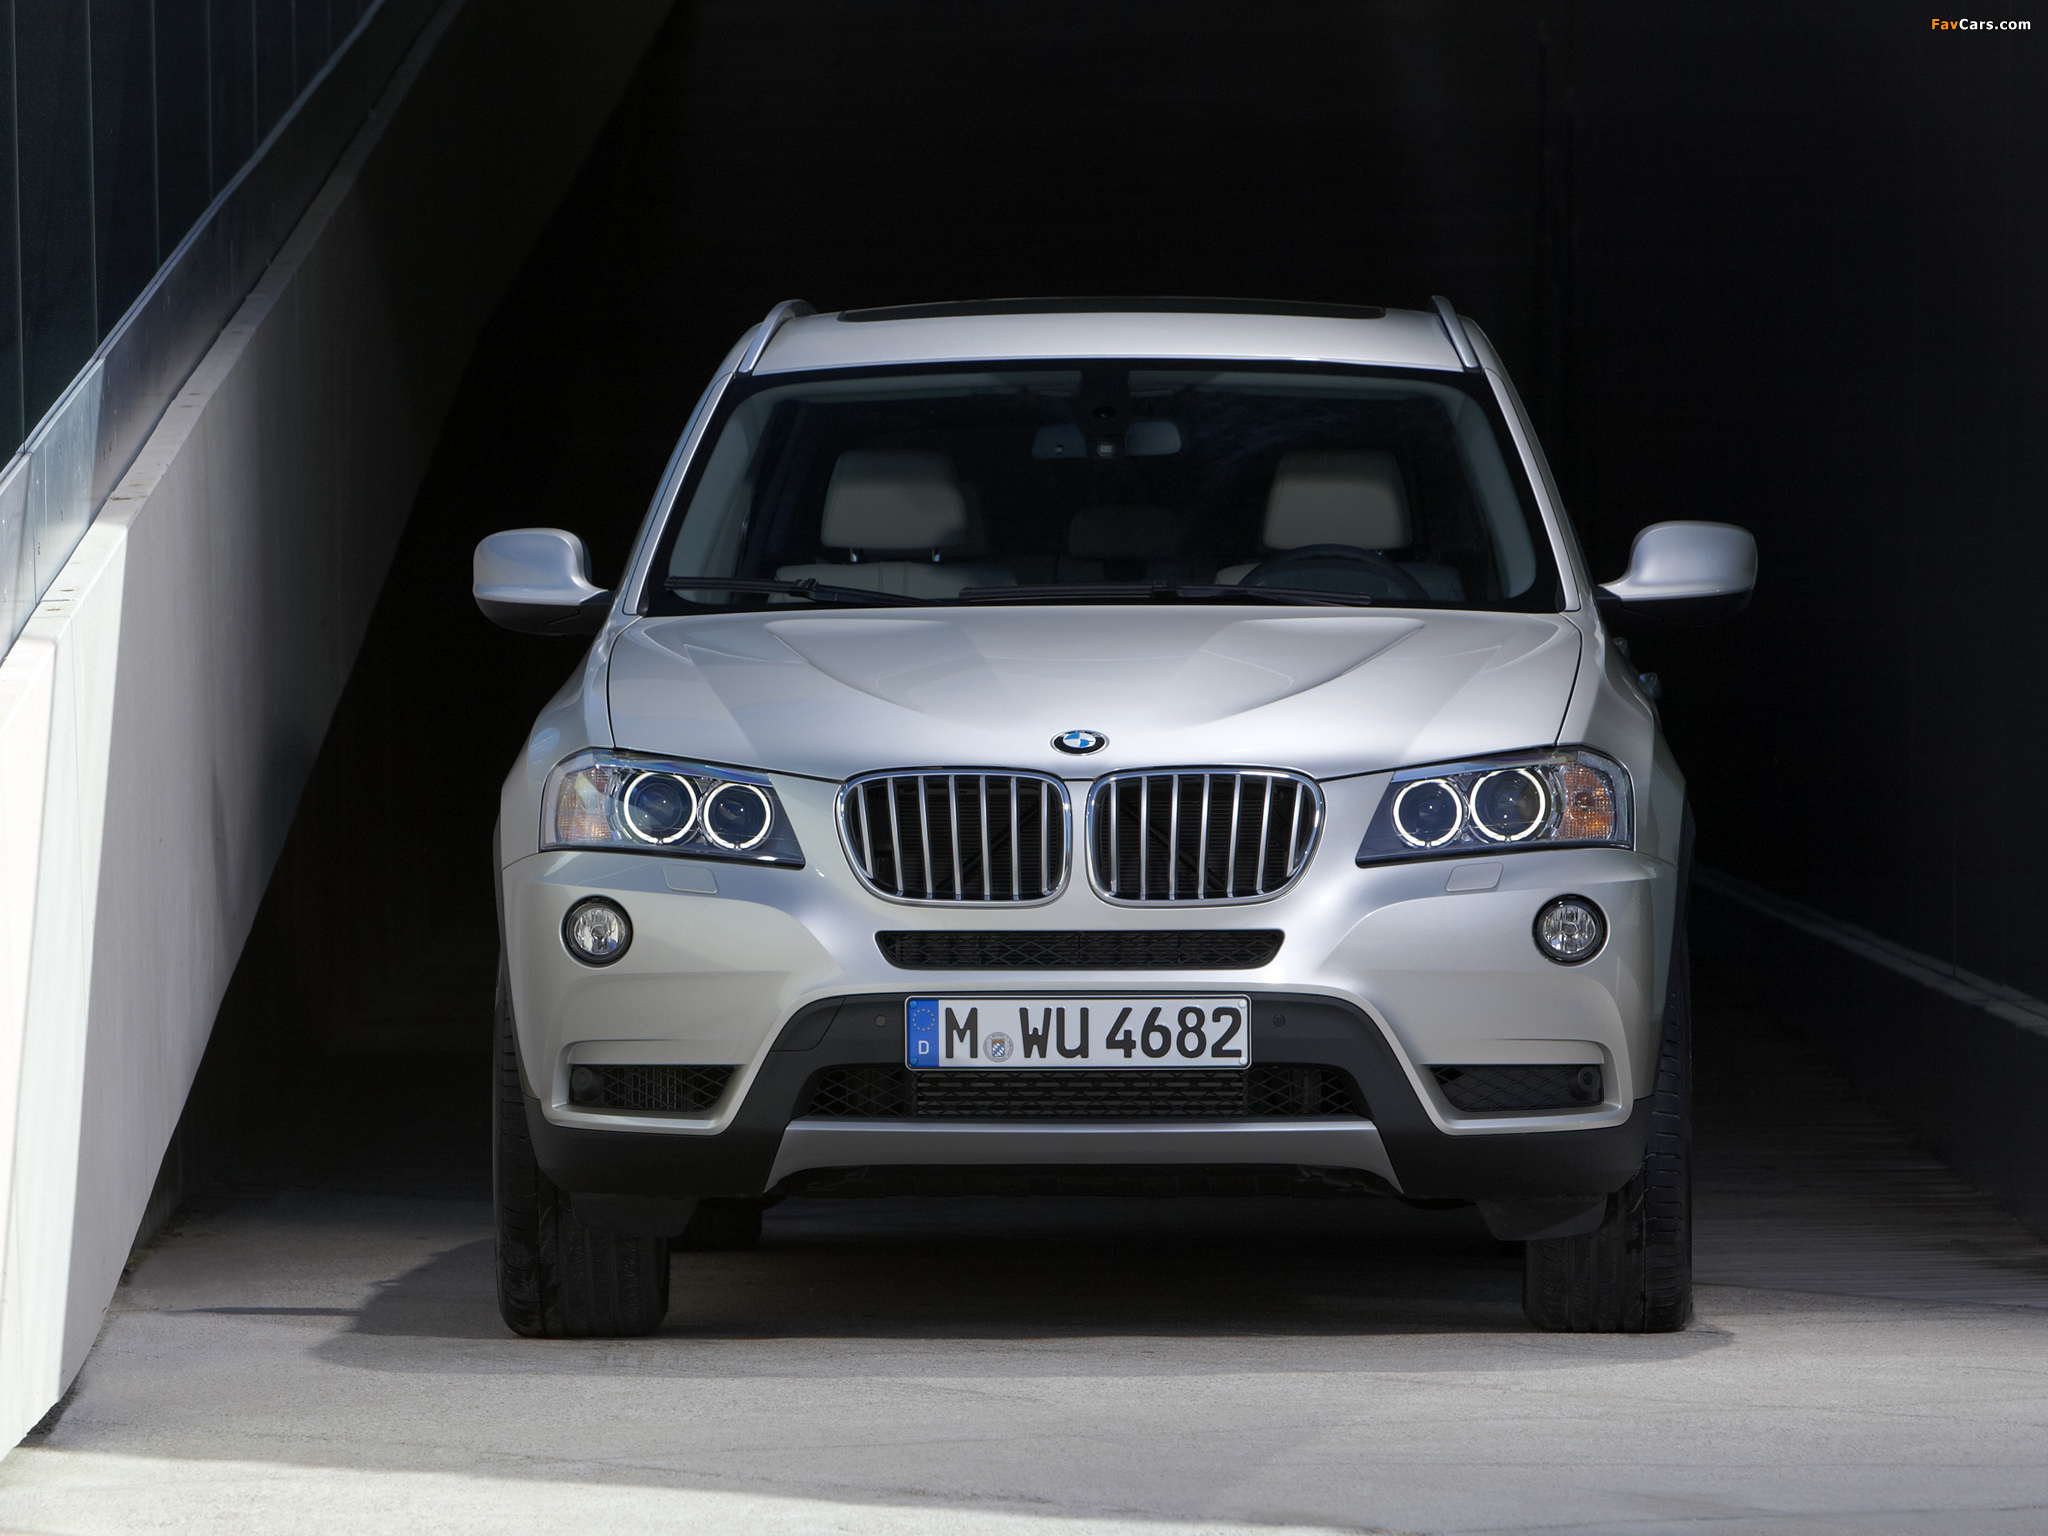 BMW X3 xDrive35i (F25) 2010 pictures (2048 x 1536)